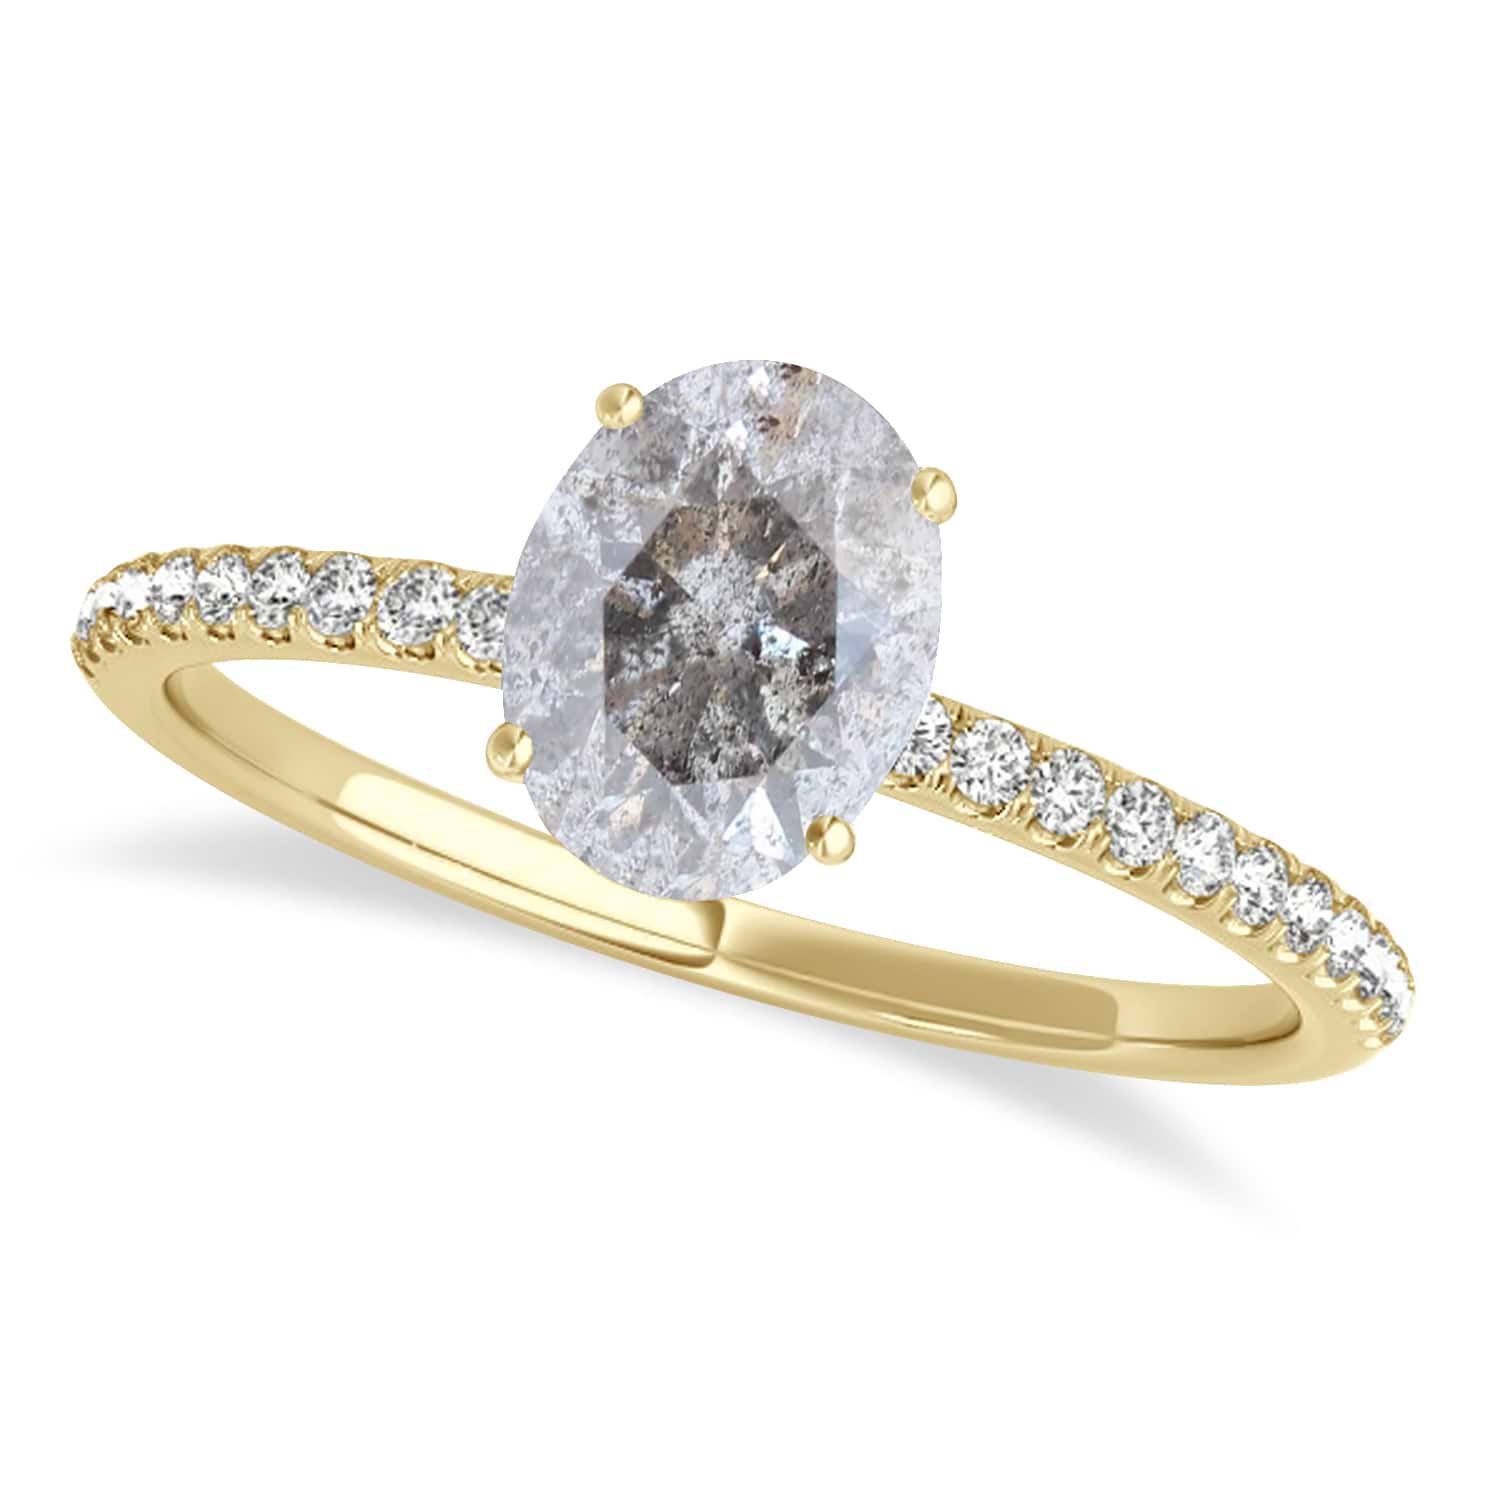 Oval Salt & Pepper Diamond Accented  Engagement Ring 14k Yellow Gold (2.50ct)